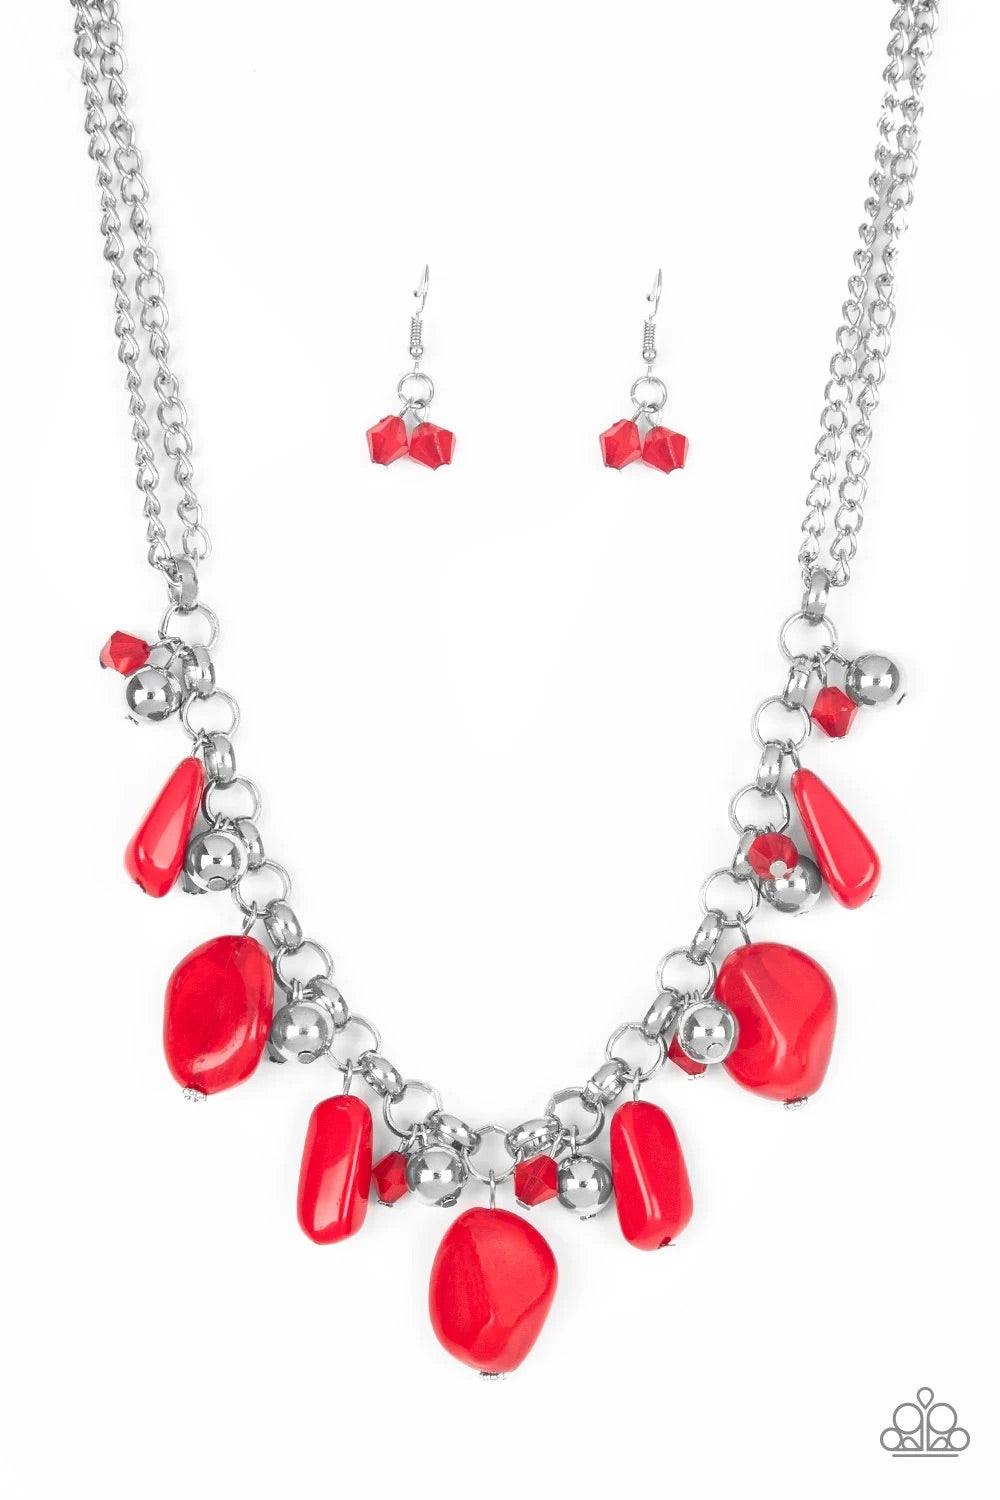 Paparazzi Accessories Grand Canyon Grotto - Red Featuring polished and cloudy finishes, a collection of red faux rocks dance from the bottom of a bold silver chain. Classic silver beads trickle between the colorful beading, adding a metallic shimmer to th